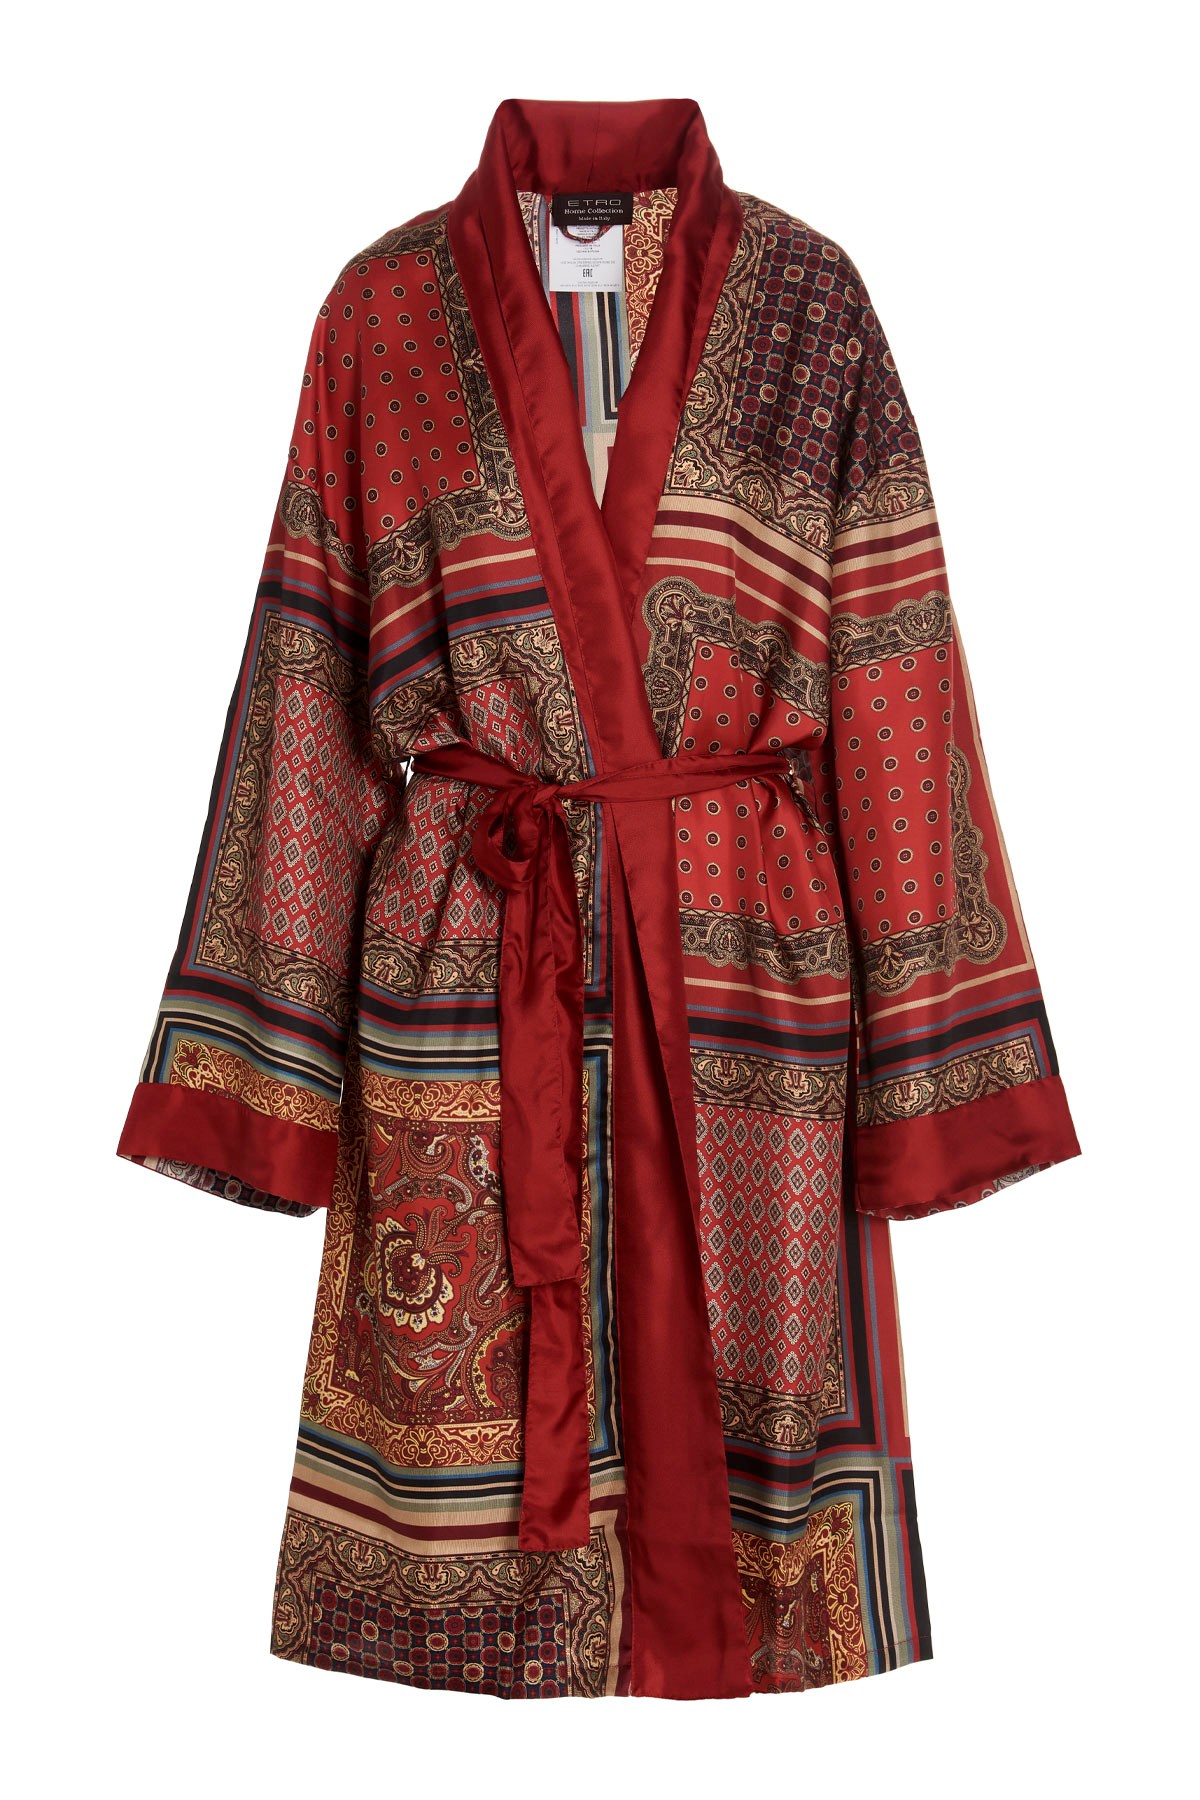 ETRO HOME 'Colyton’ Short Dressing Gown